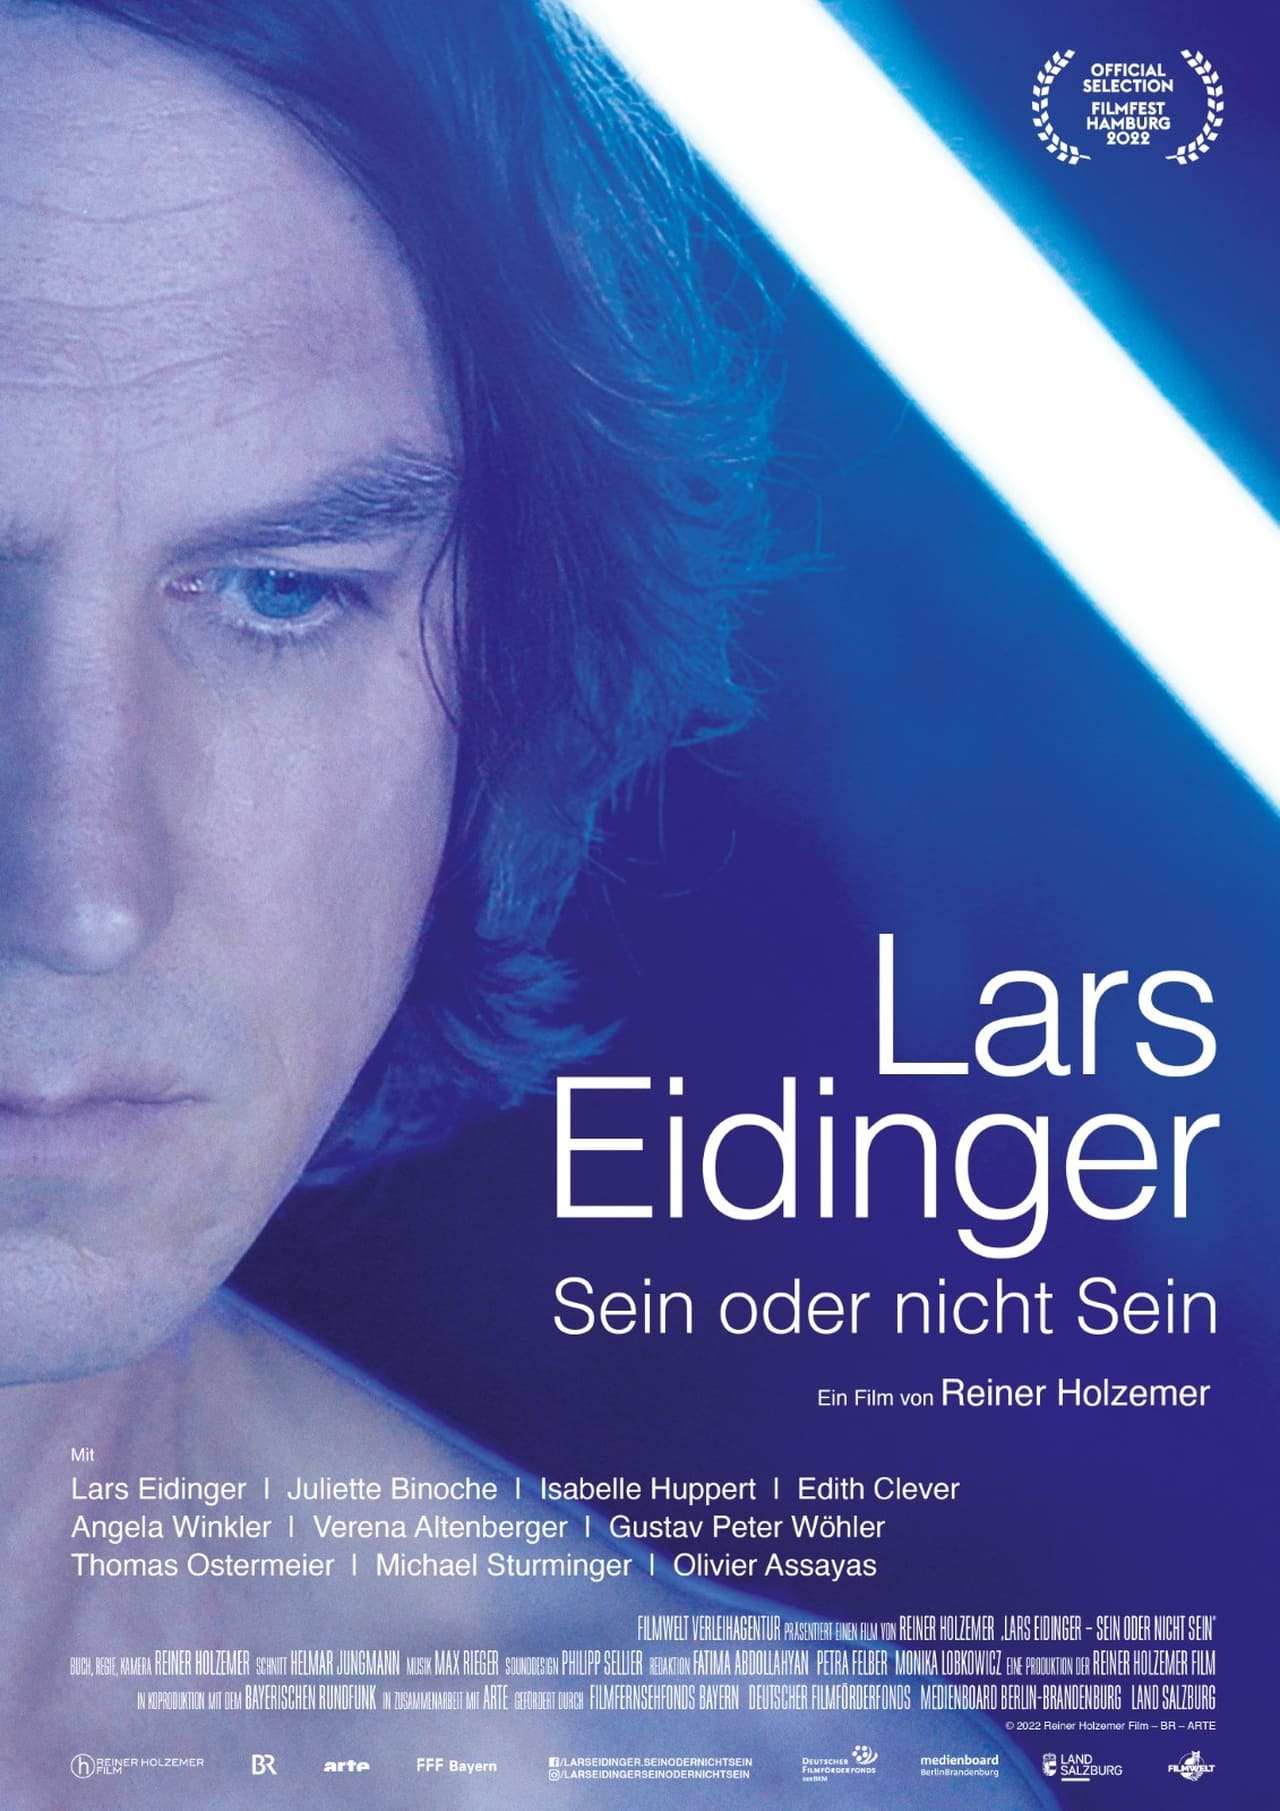 Lars Eidinger – To Be or Not To Be